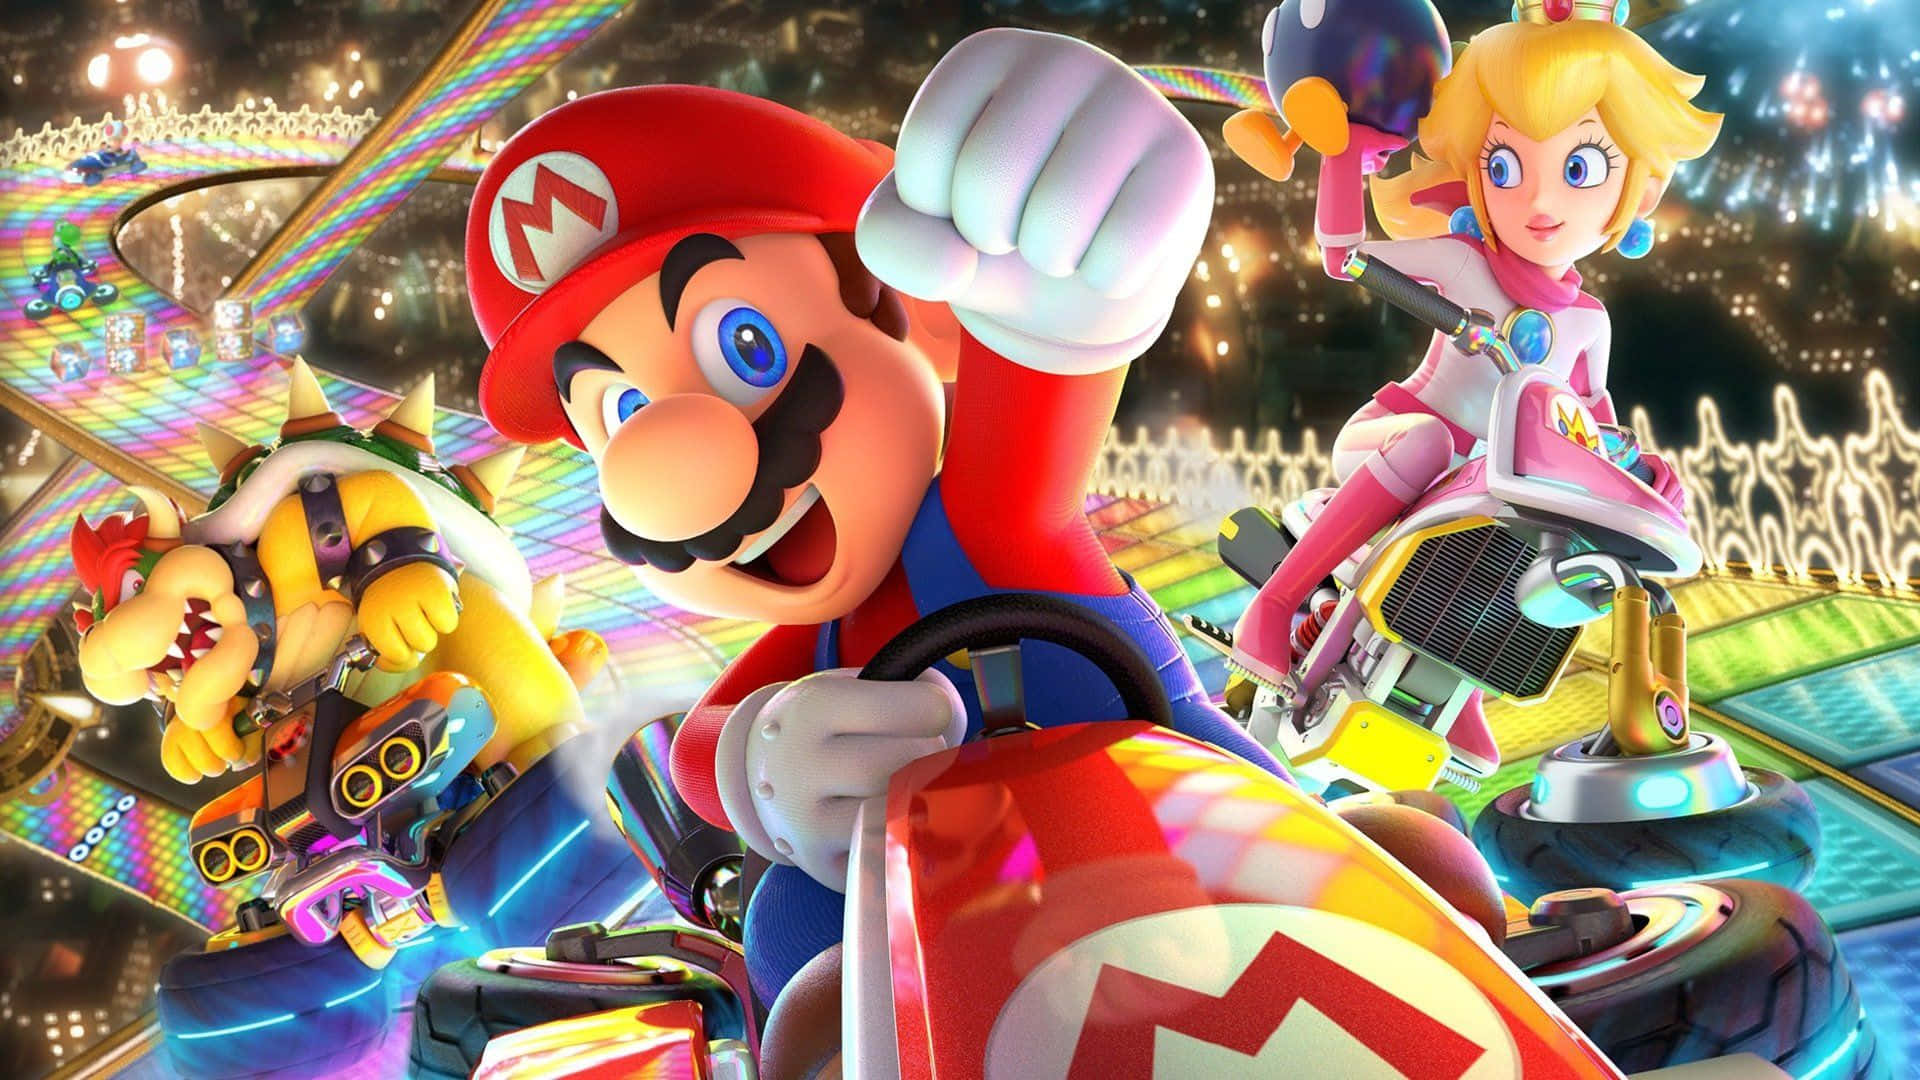 Get ready to hit the track in Mario Kart!